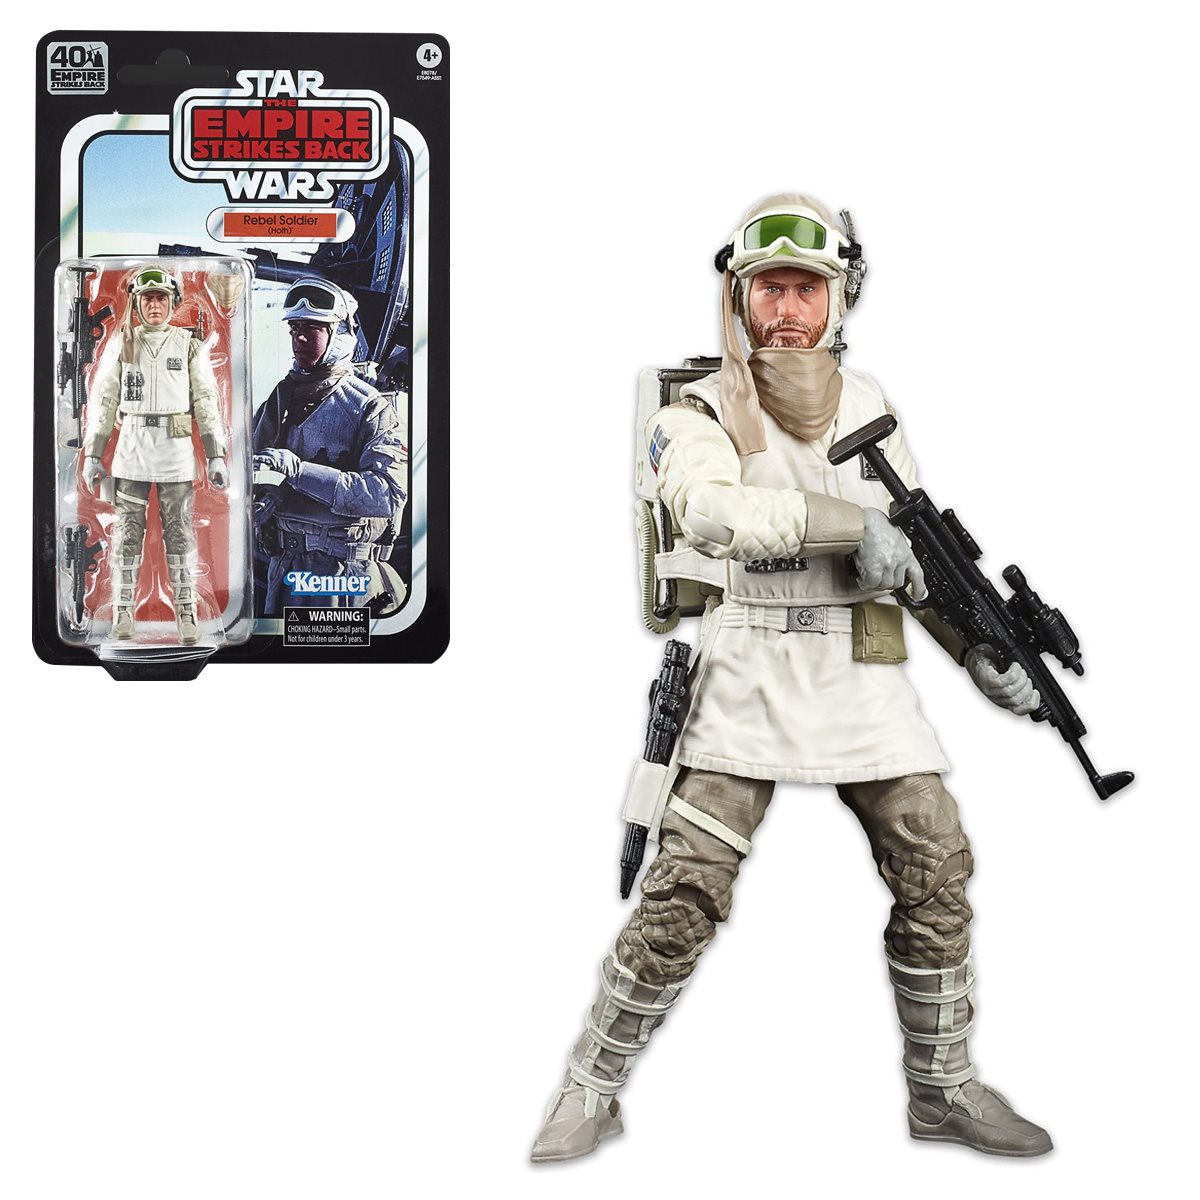 Star Wars 40th Anniversary Black Hoth Rebel Soldier Action Figure 